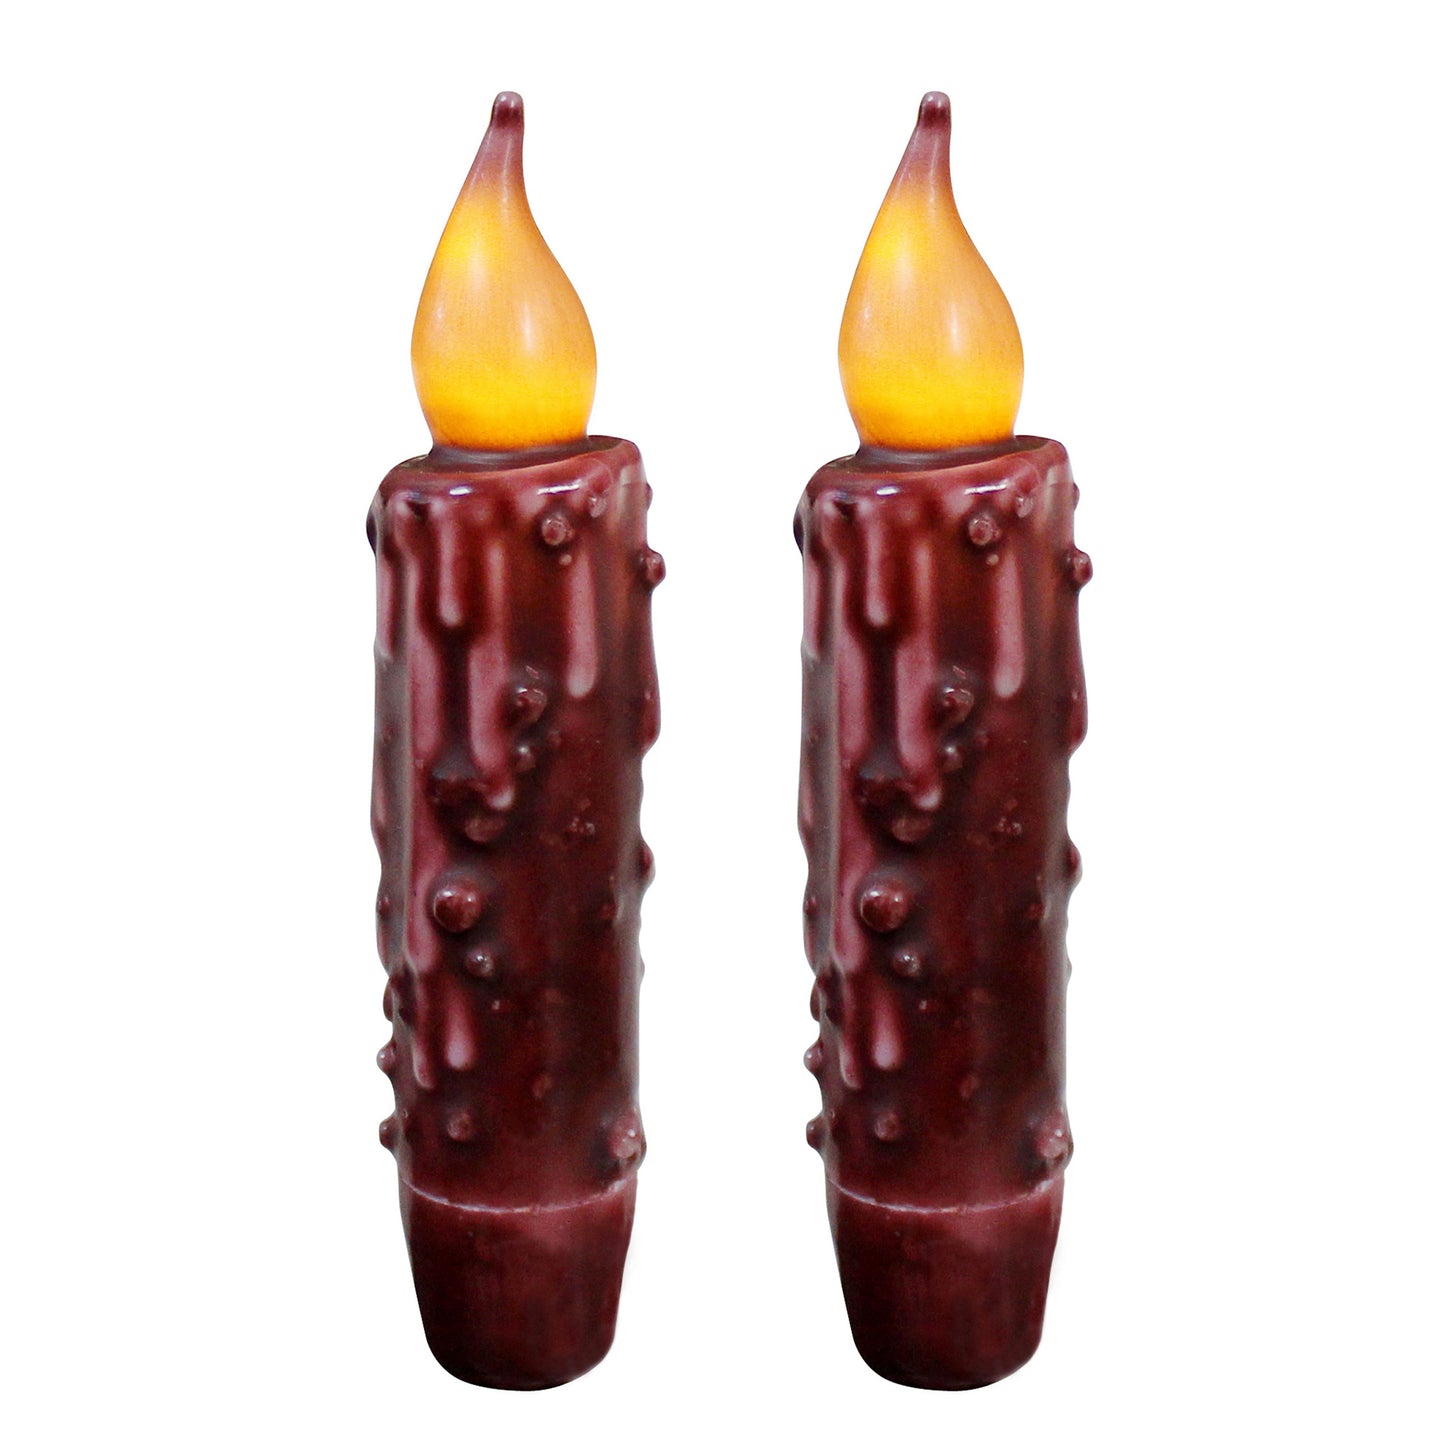 CVHOMEDECO. Real Wax Hand Dipped Battery Operated LED Timer Taper Candles Country Primitive Flameless Lights Décor, 4.75 Inch, Burgundy, 2 PCS in a Package